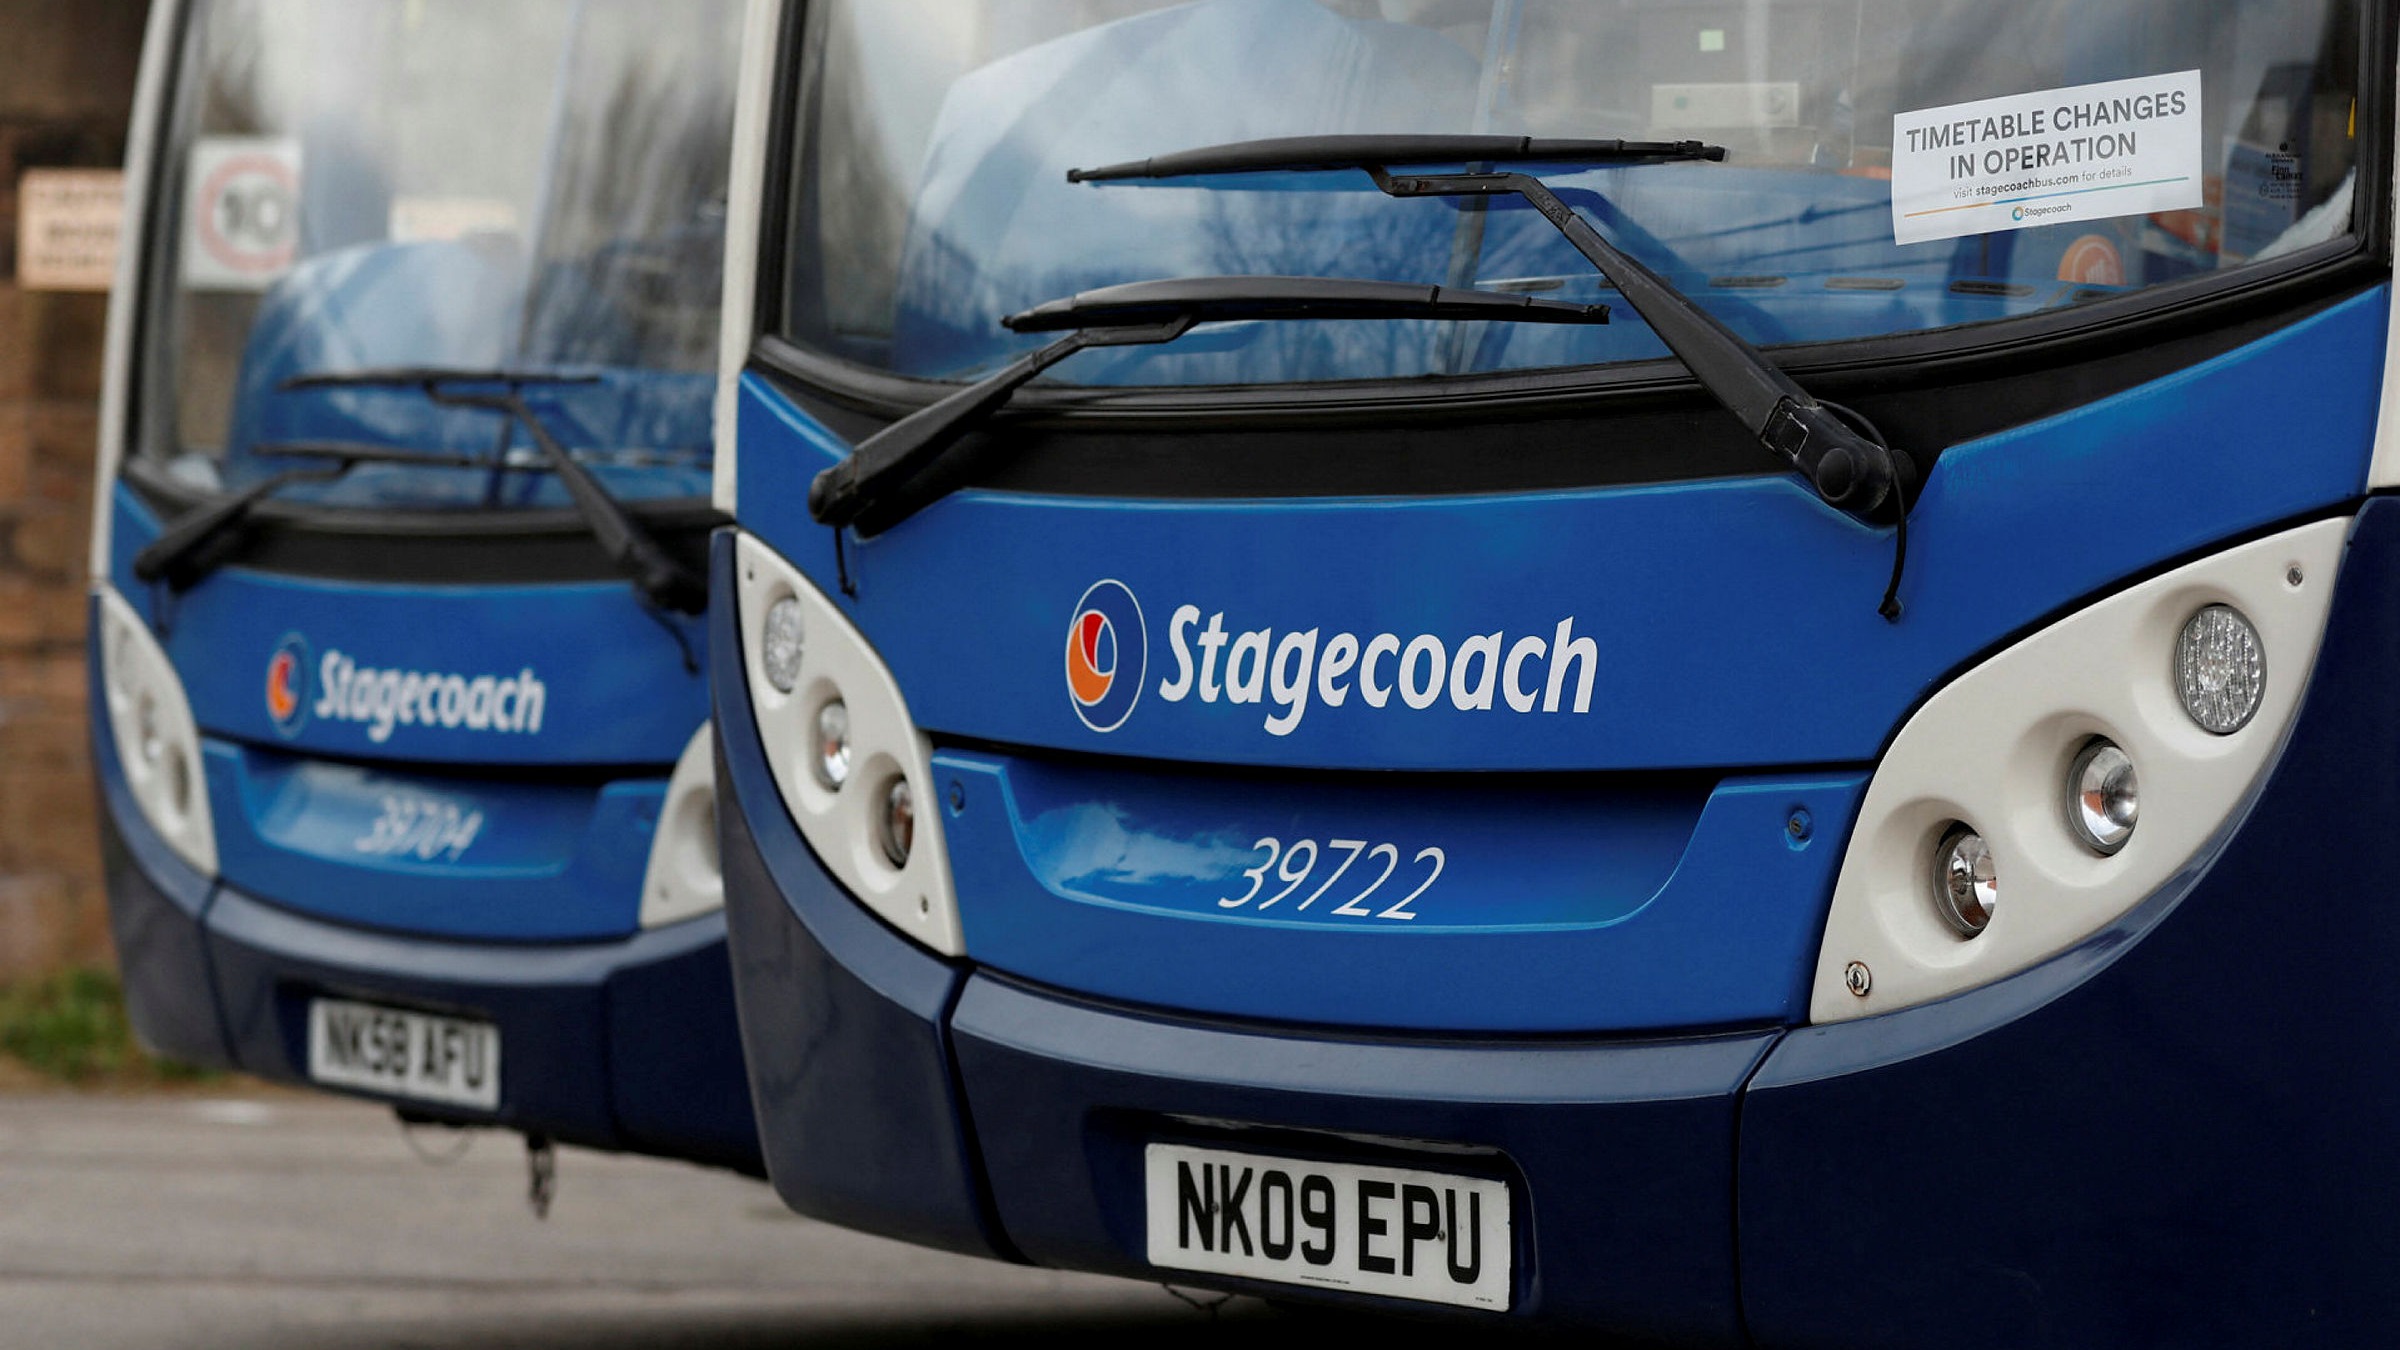 What the Stagecoach Share Price Says About the Economy